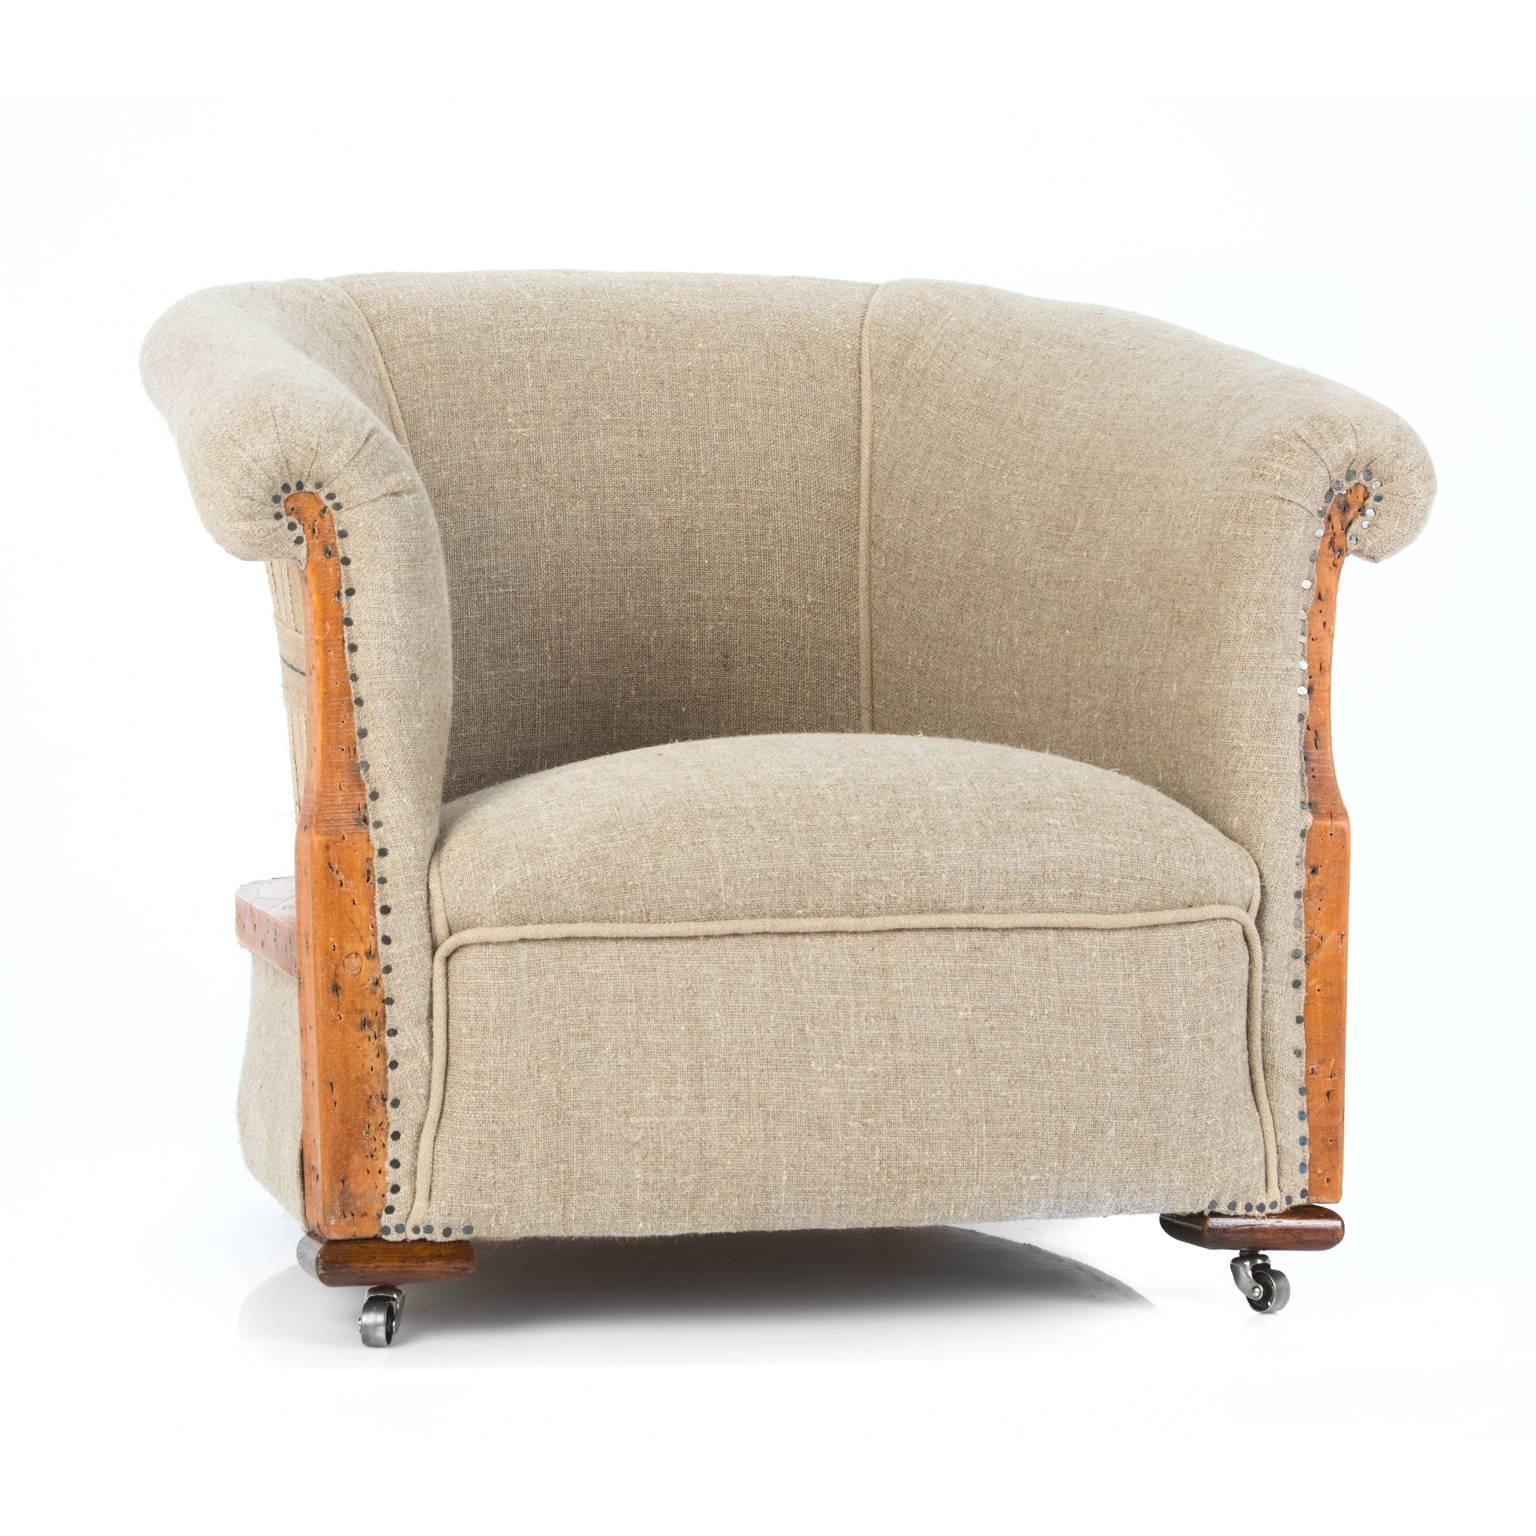 English Deconstructed and Exposed Late Victorian Organic Flax Linen Tub Chair. For Sale